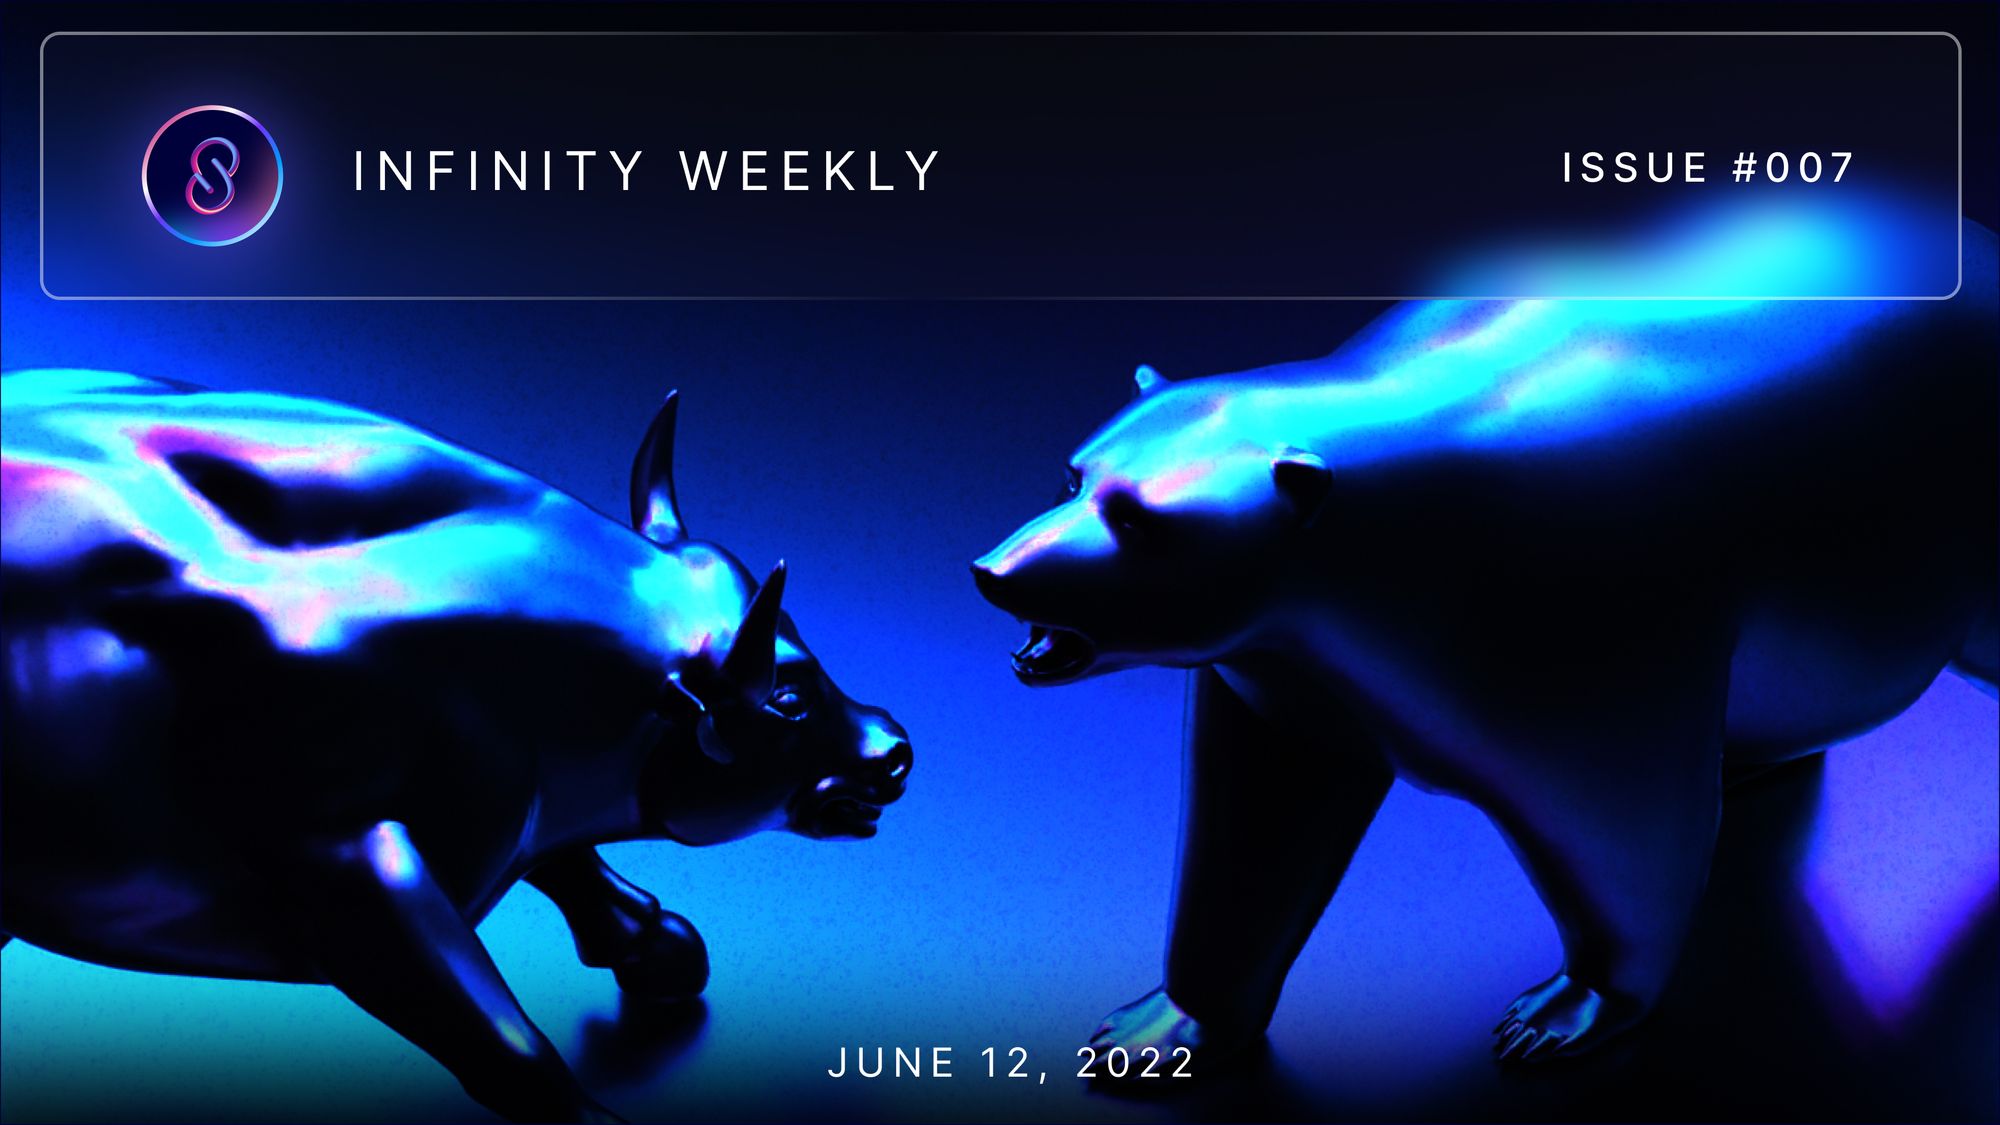 Infinity Weekly: Only the Strong Will Survive